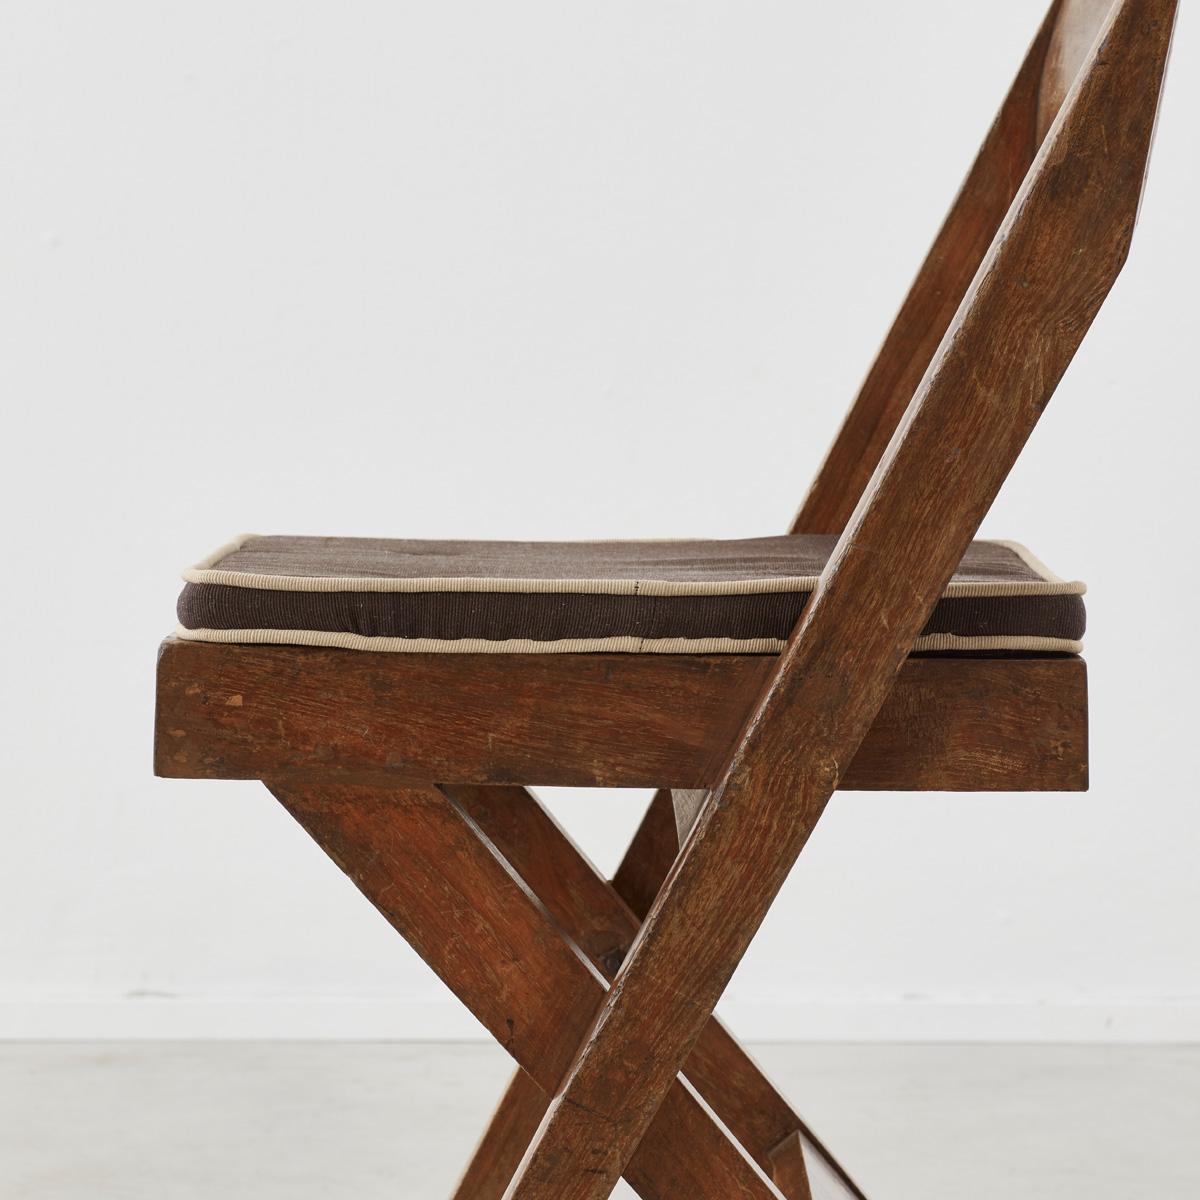 Pierre Jeanneret ‘Library’ chair, model no. PJ-SI-51-A, France/India, 1956 For Sale 4